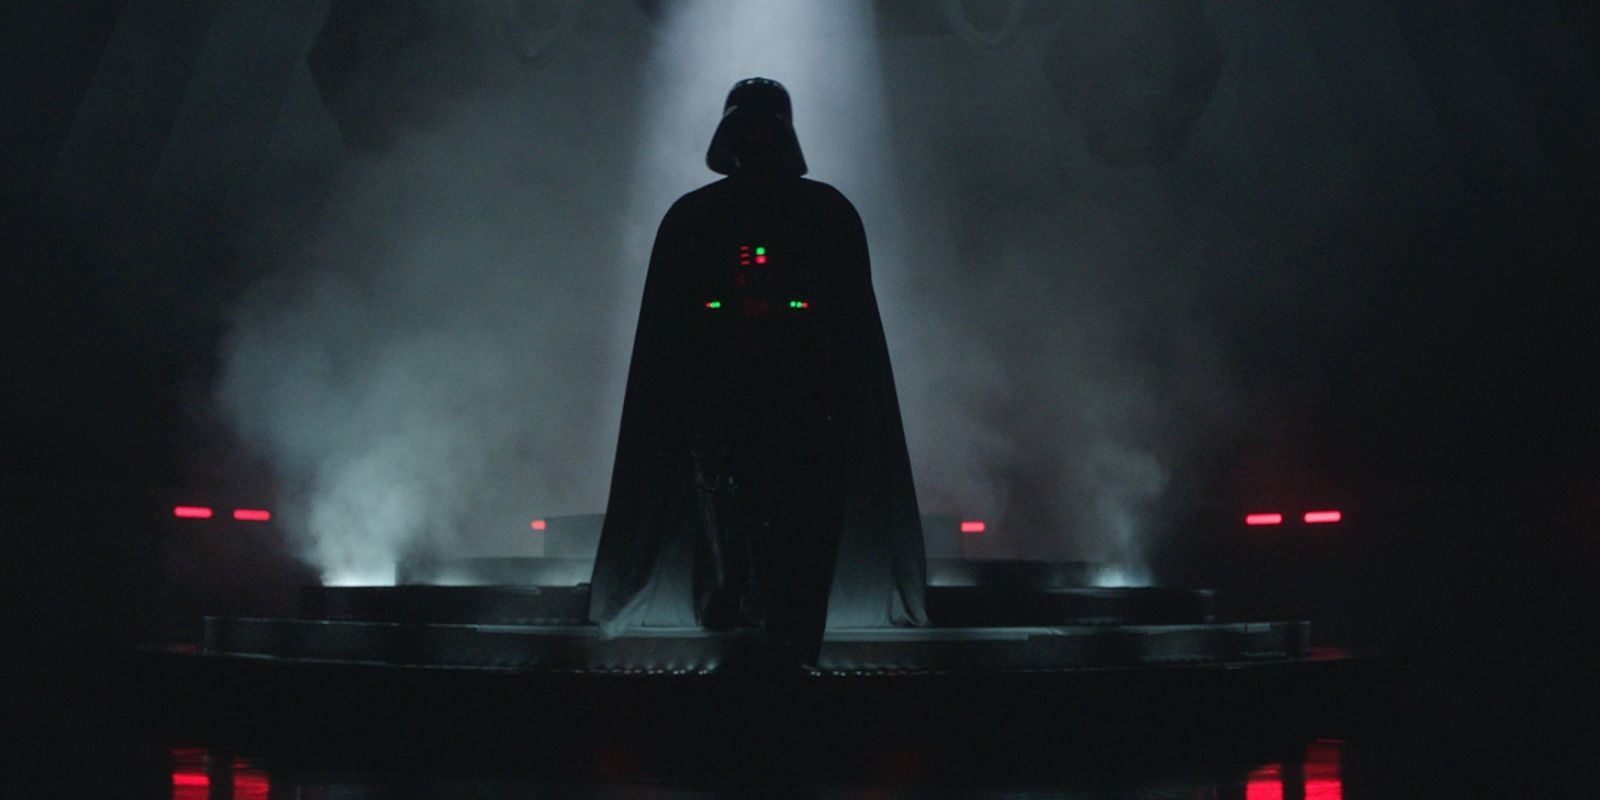 The silhouette of Darth Vader aboard his ship